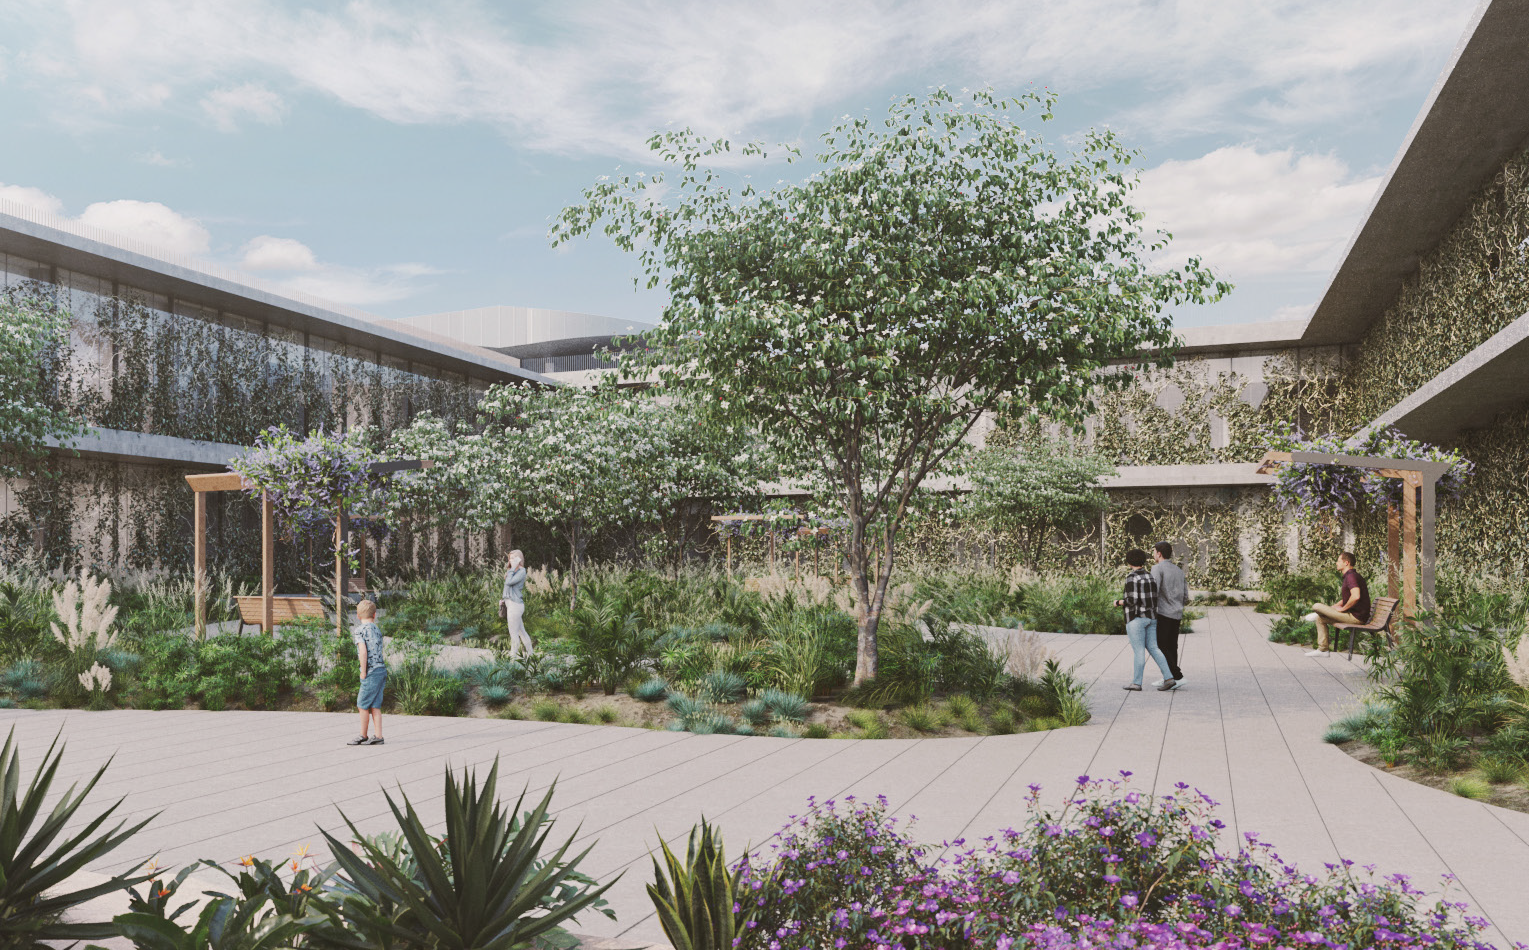 Red Sea Global celebrates milestone achievements for the Turtle Bay Hospital with design approval from the Ministry of Health and construction underway.